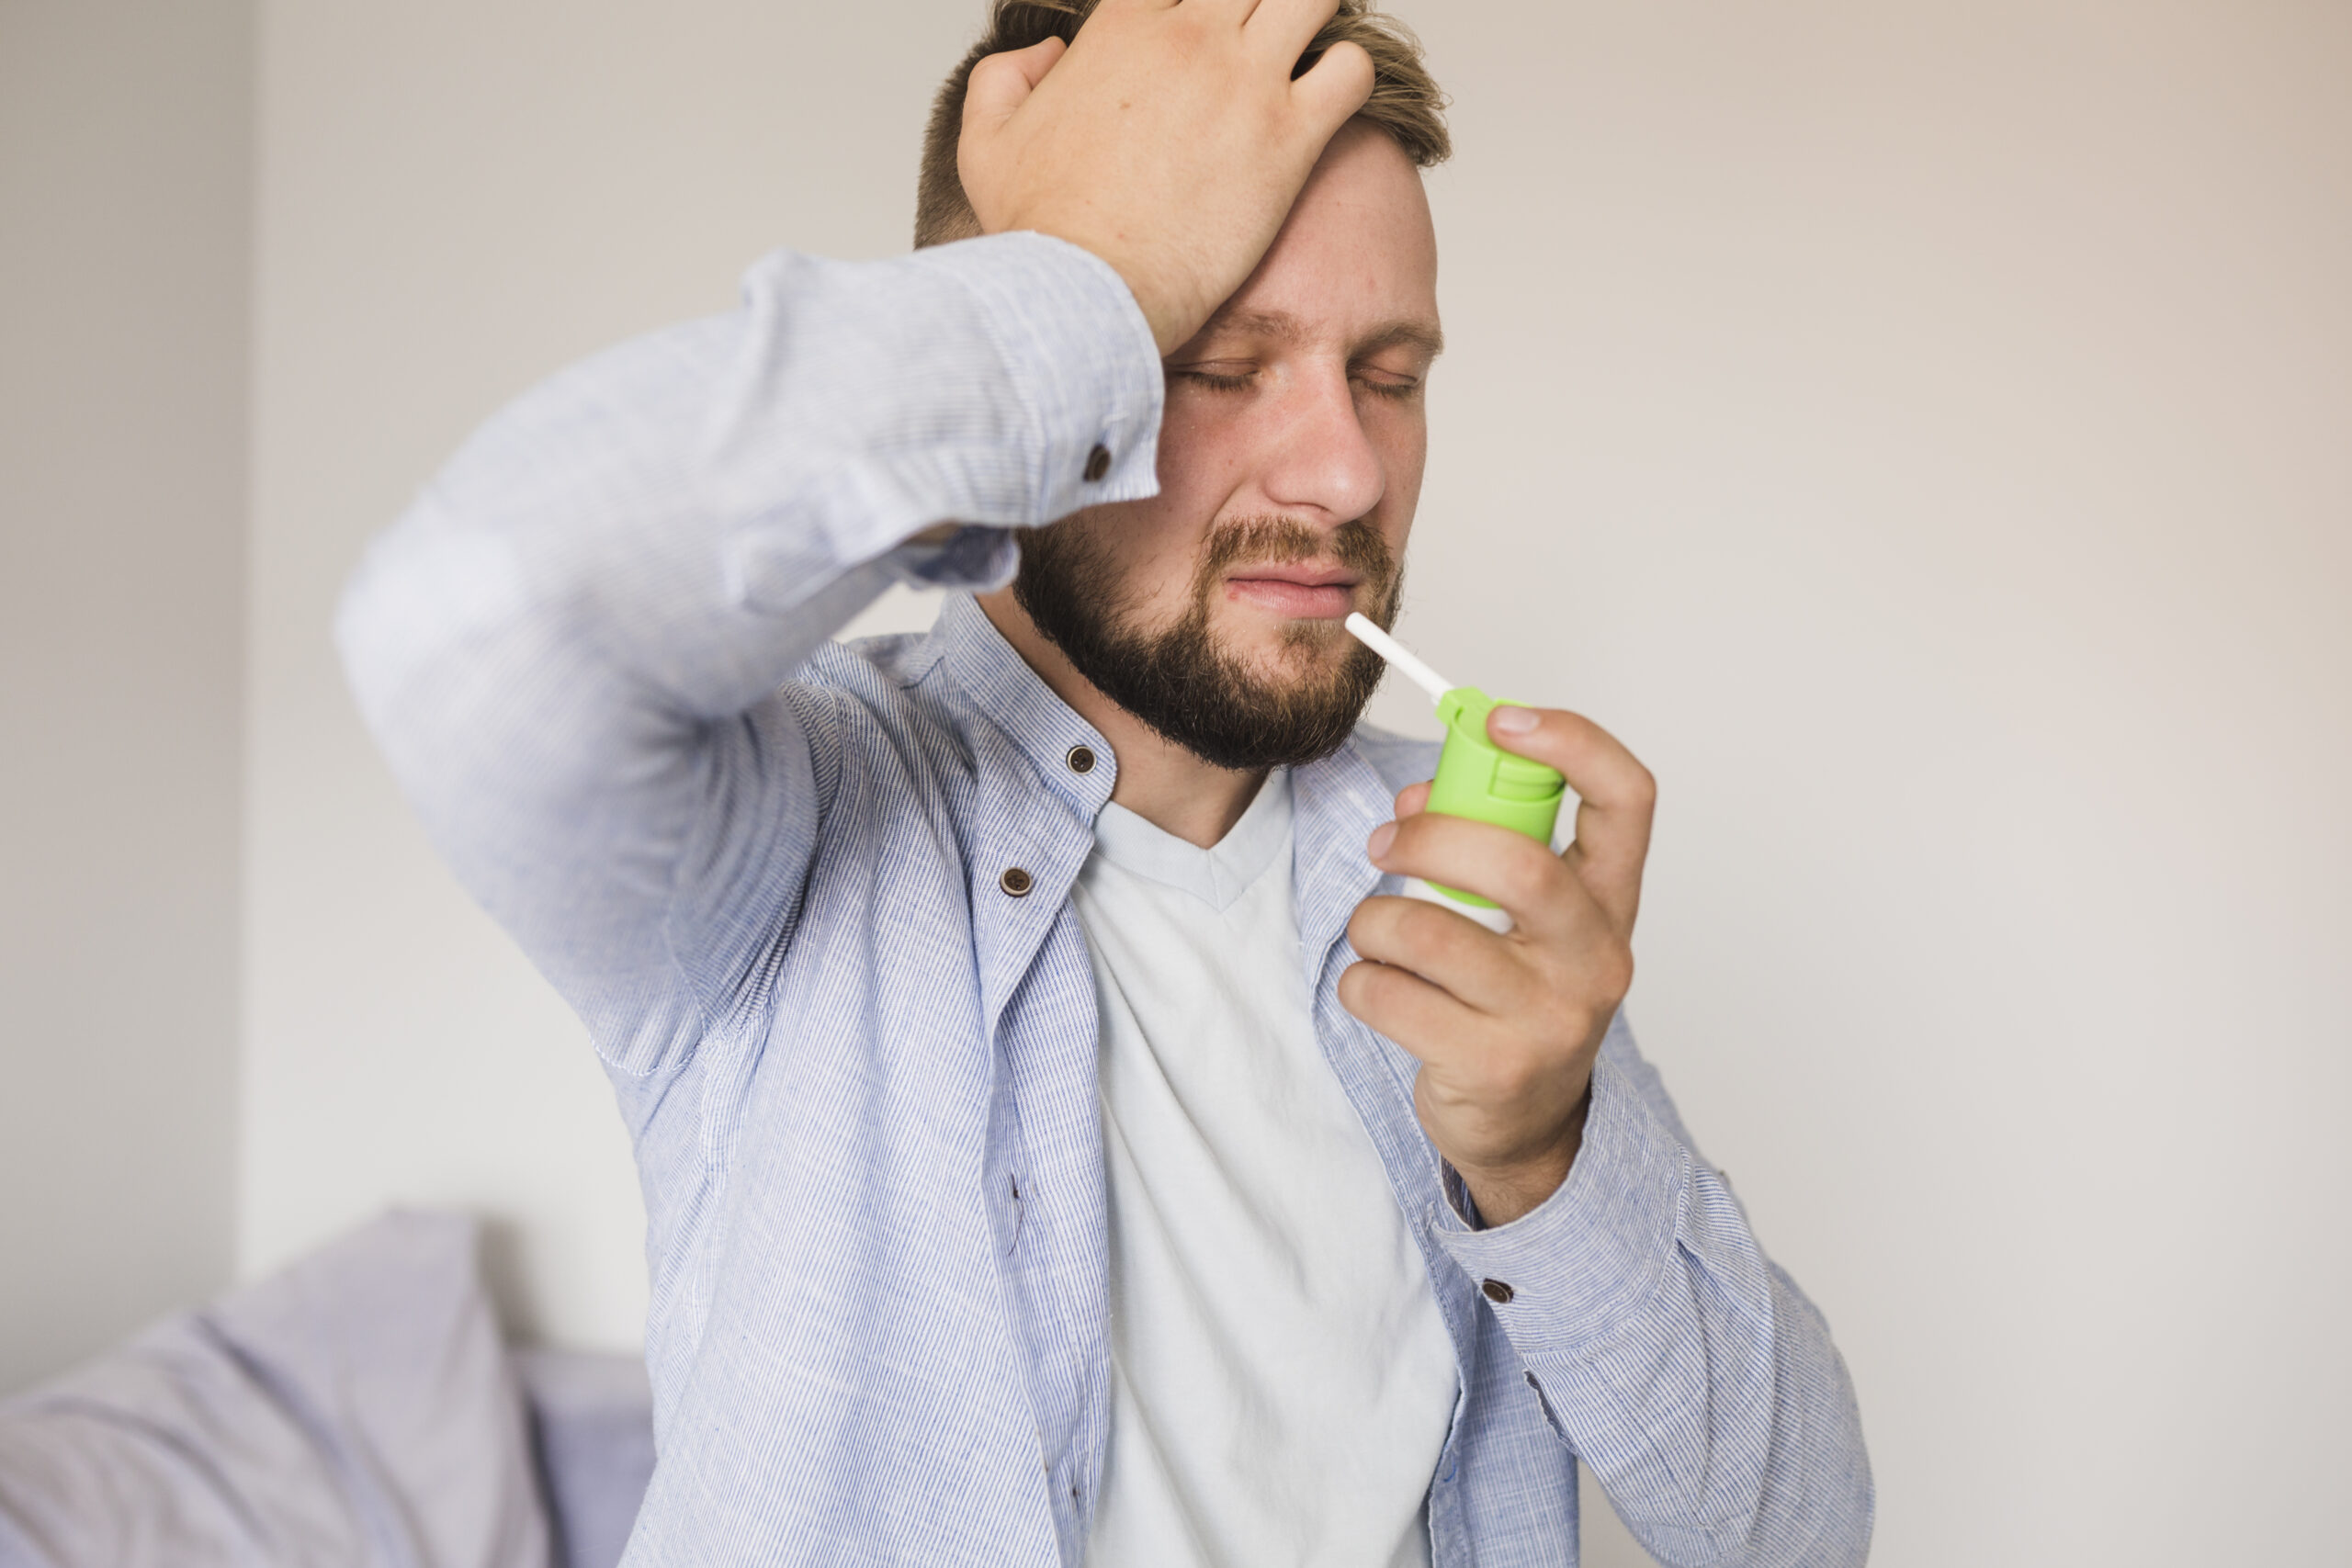 The Connection Between Stress and Asthma